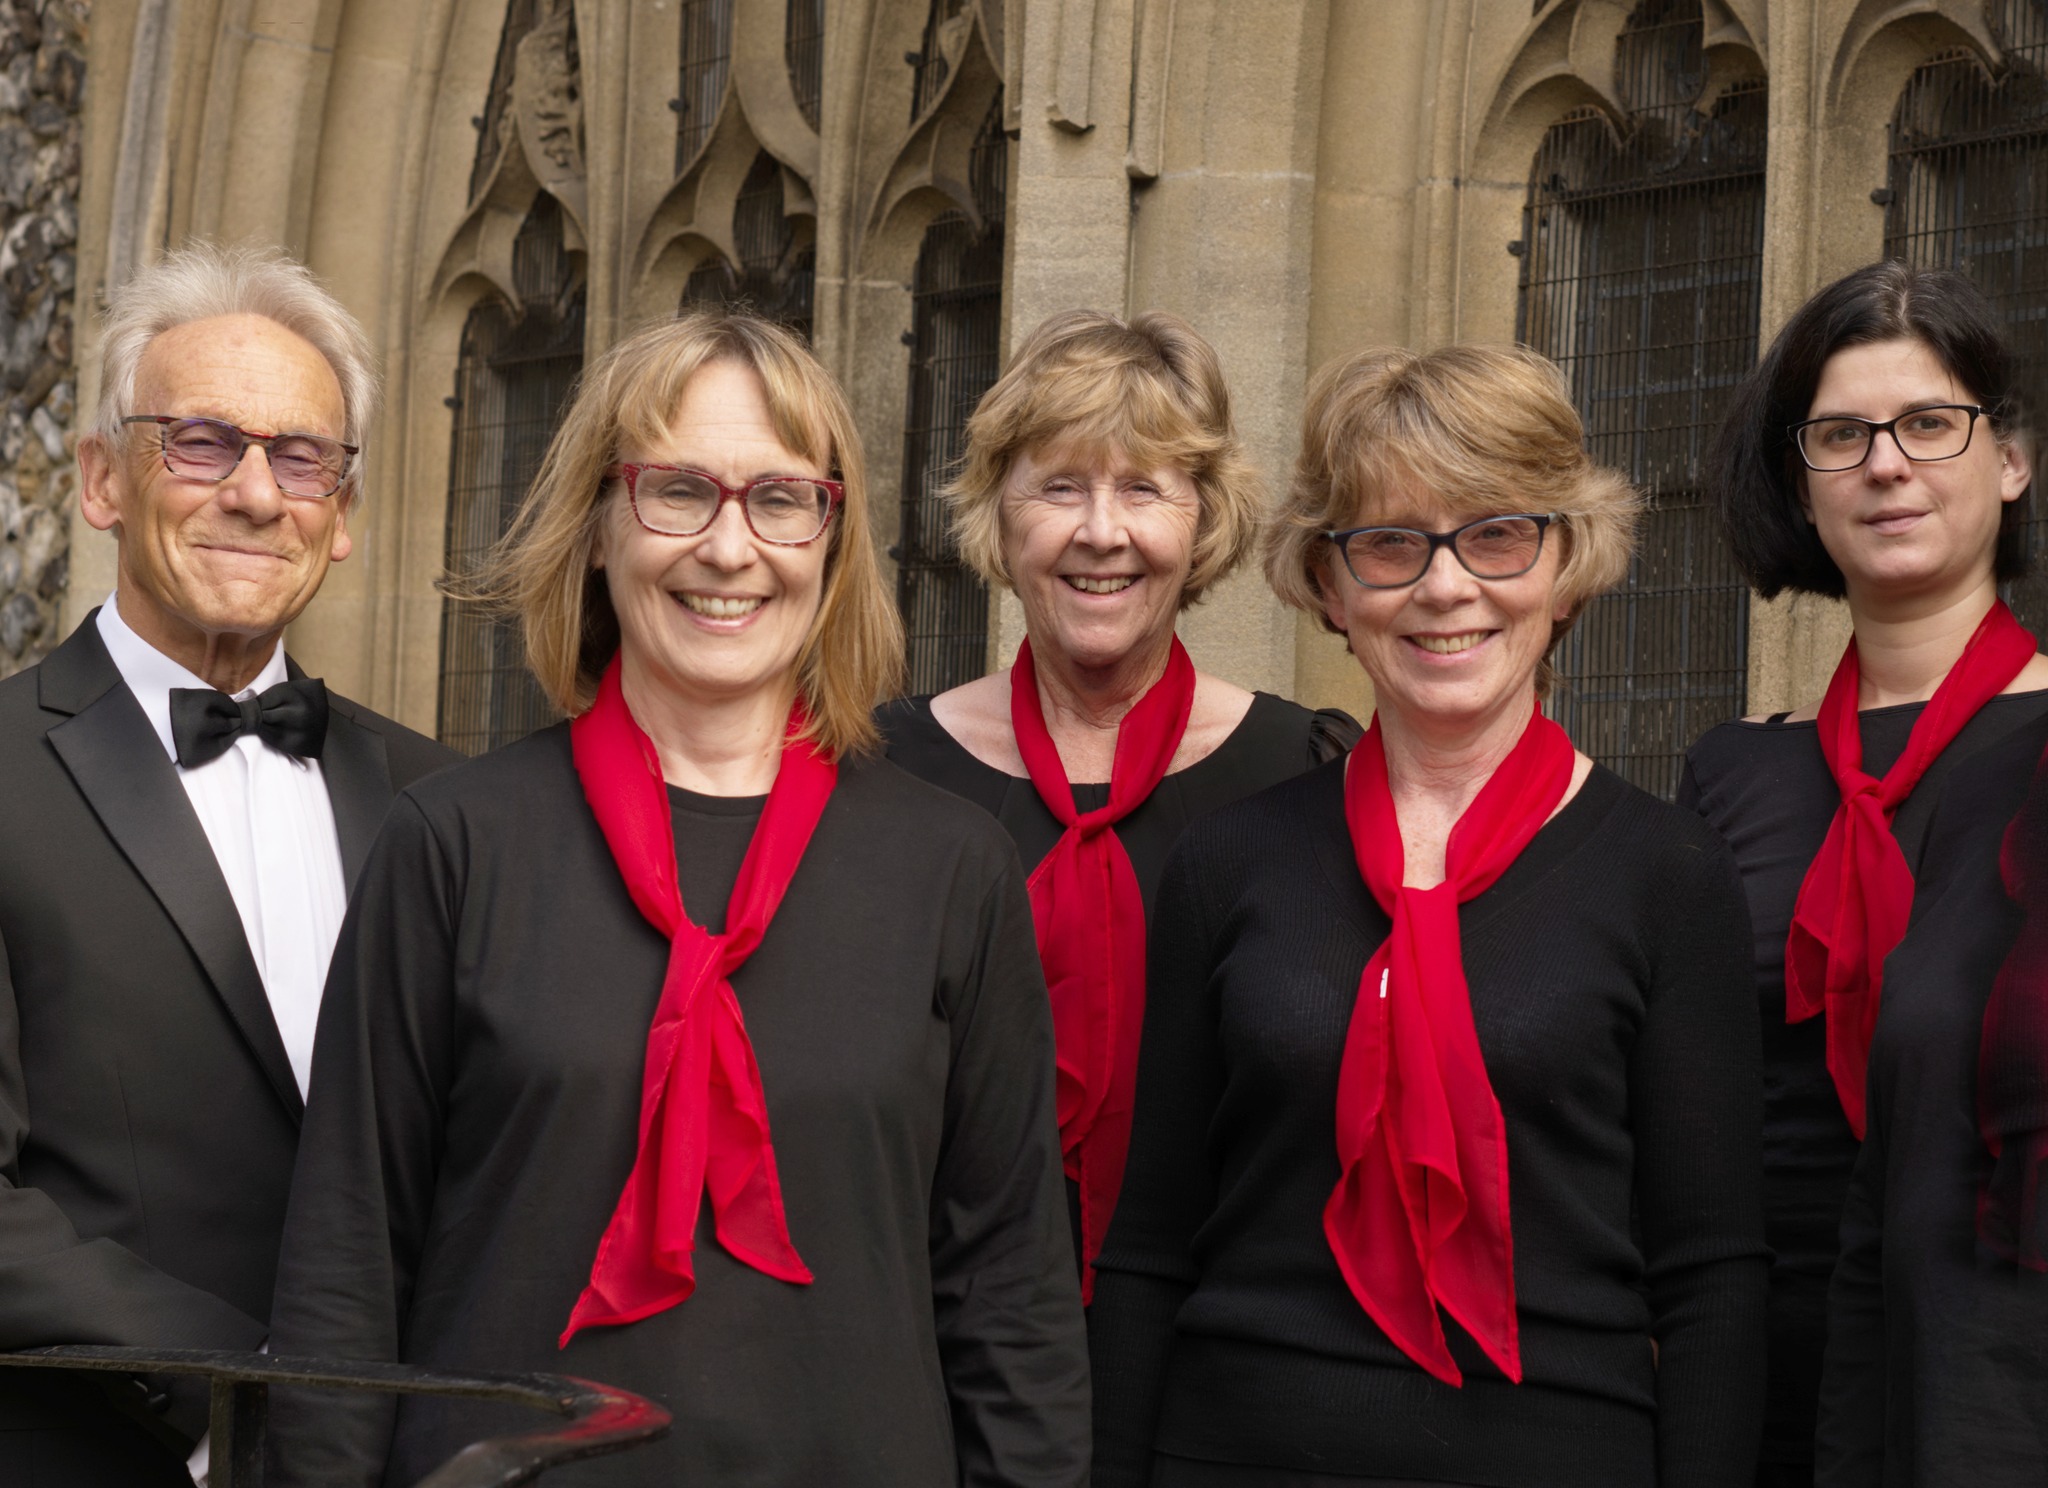 Members of the Portsmouth Choral Union outside of St Mary's Church